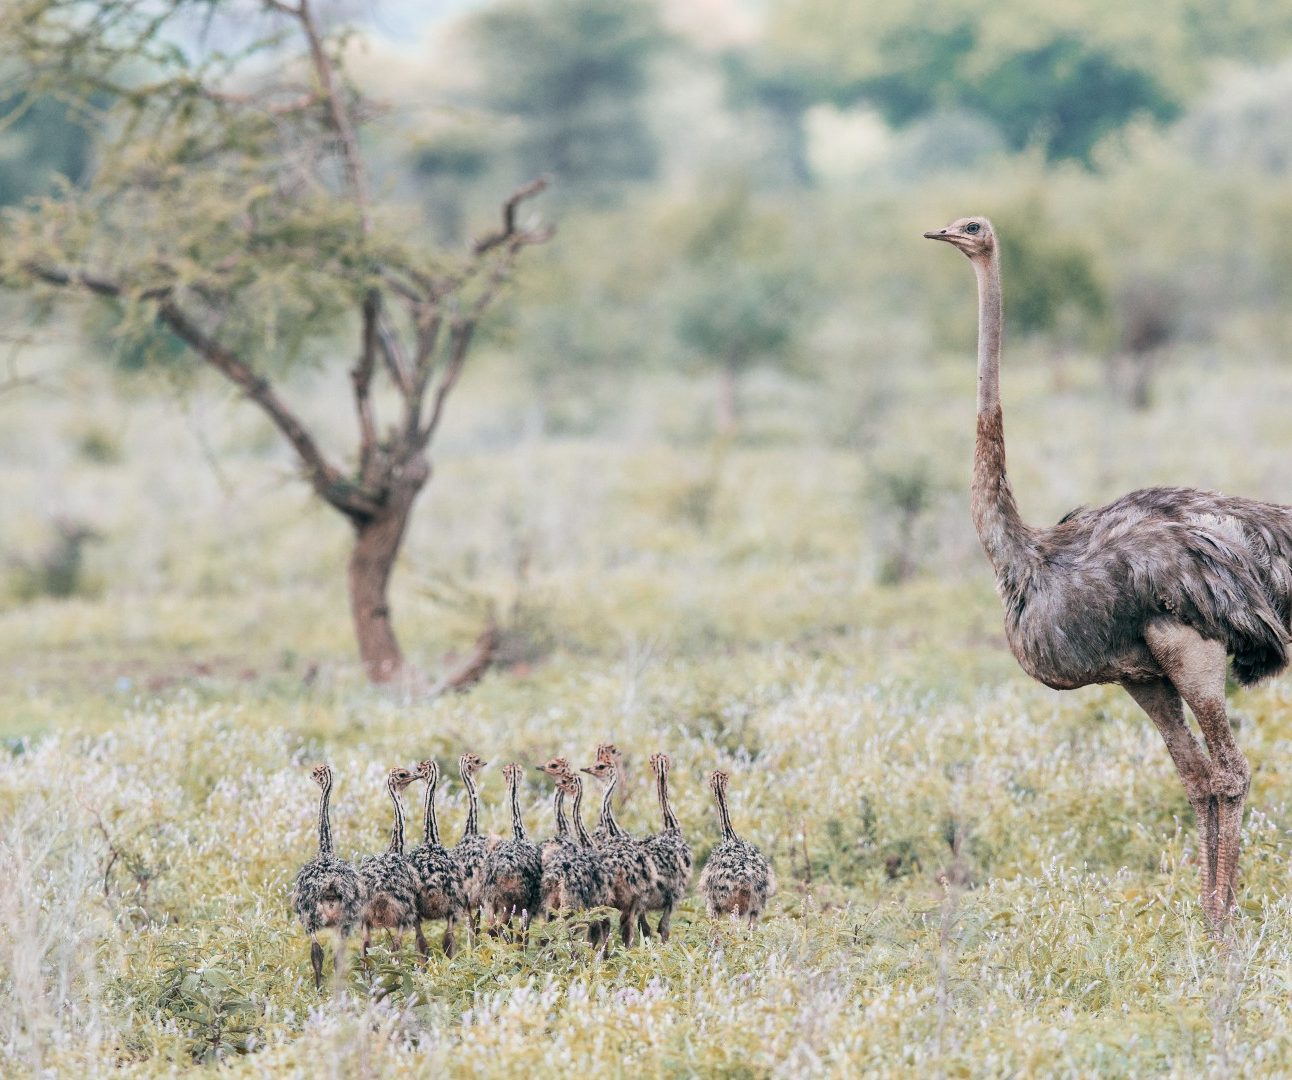 An ostrich standing in the savannah with several chicks standing next to her